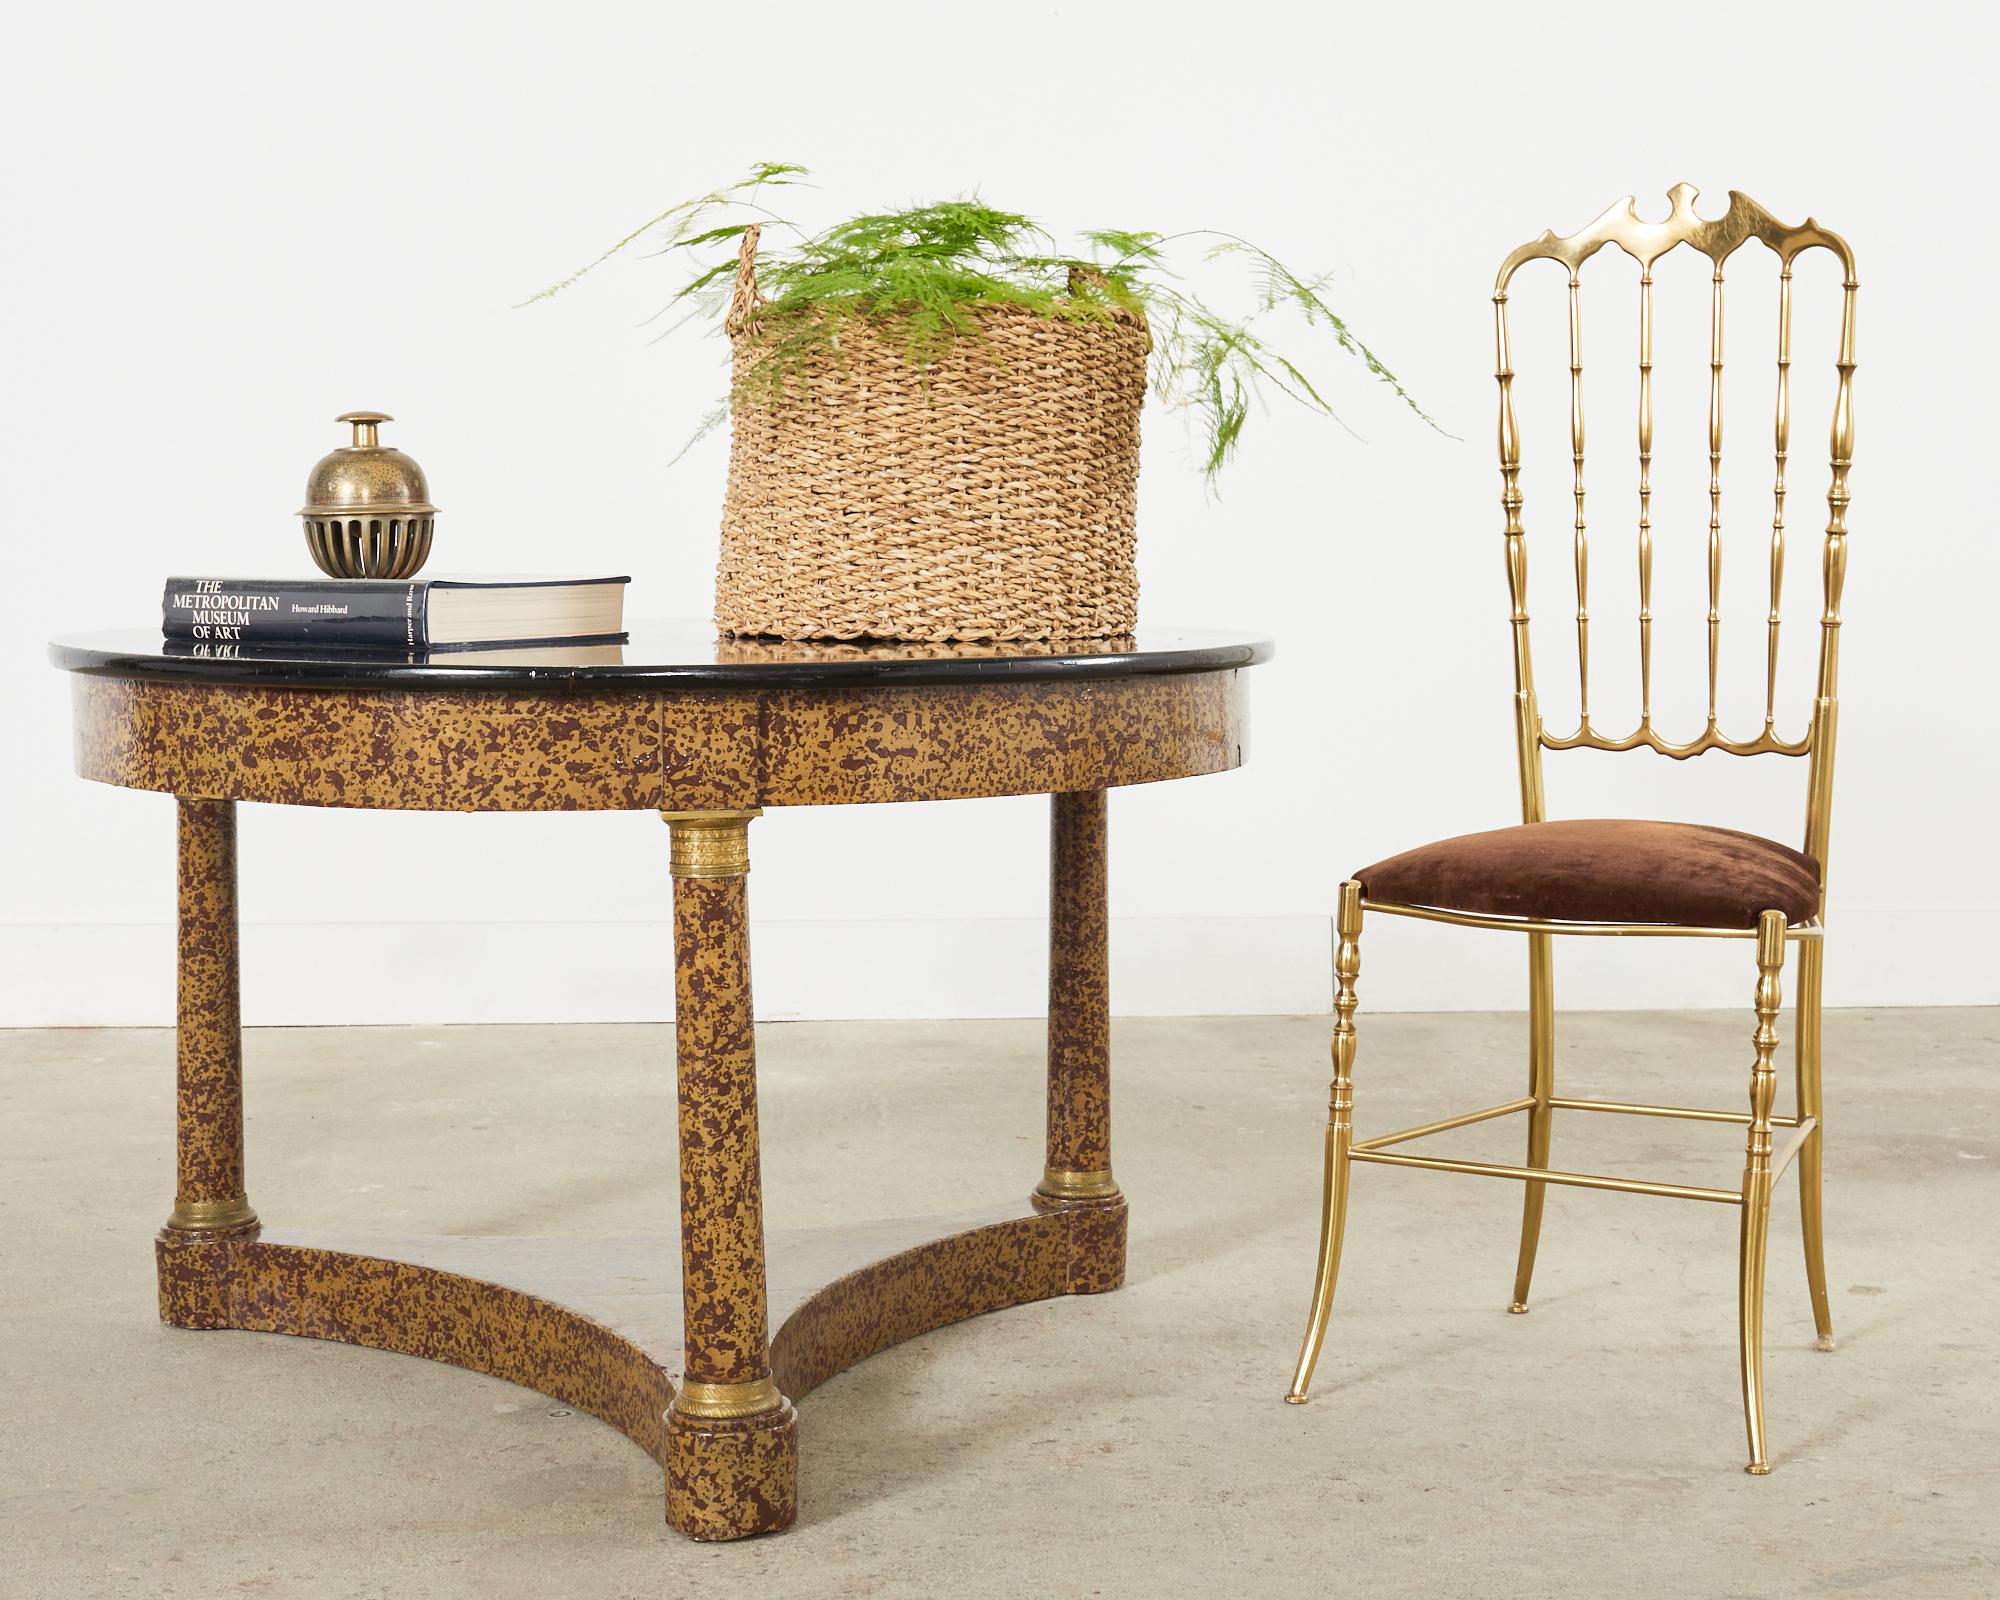 Whimsical round coffee or cocktail table lacquer speckled by artist Ira Yeager (American 1938-2022). The table is made in the French Napoleonic empire style featuring bronze mounted round legs. The stunning finish has a beige ground with brown